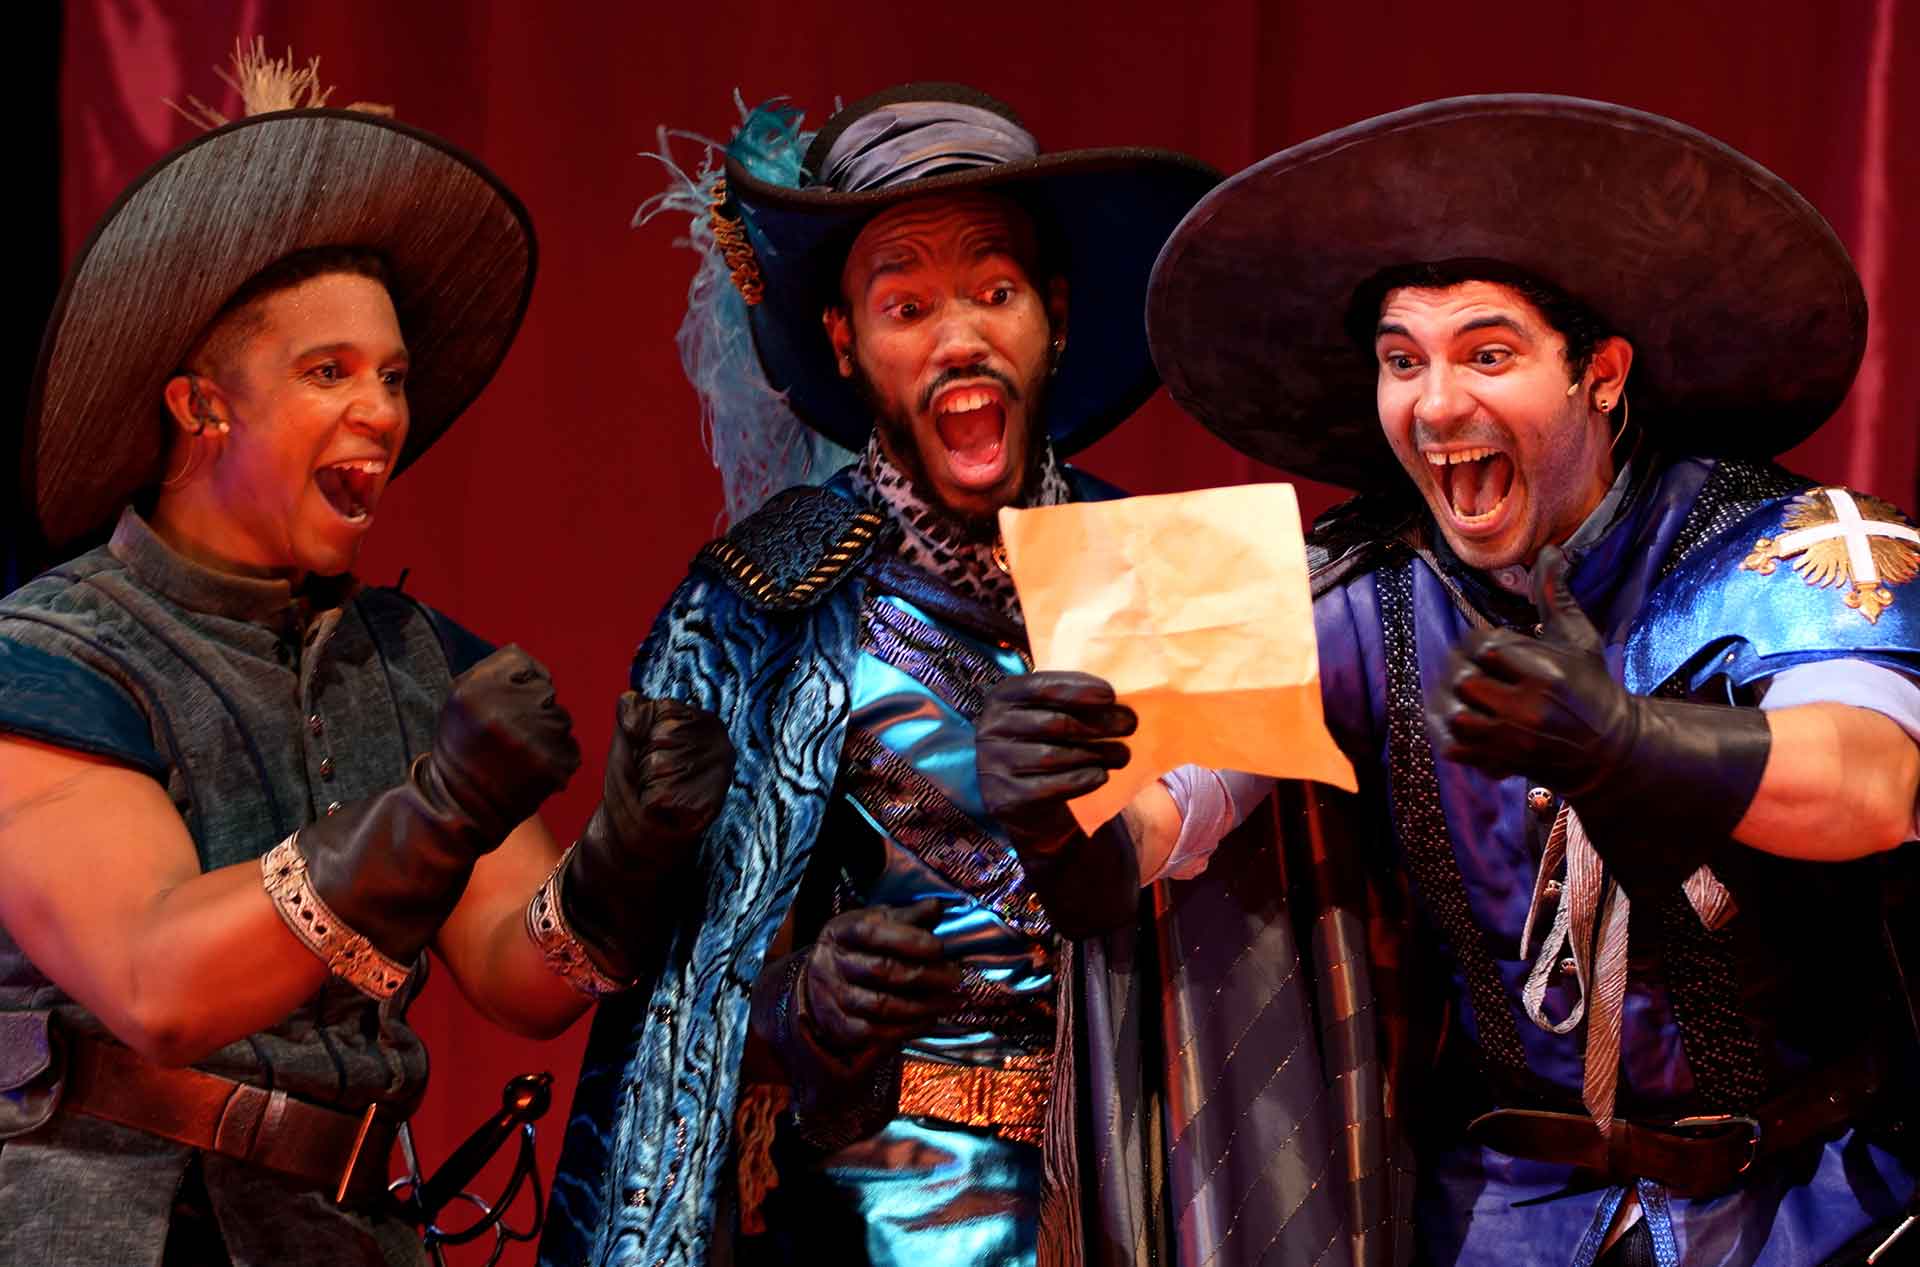 The Three Musketeers looking at a piece of paper with surprised expressions.